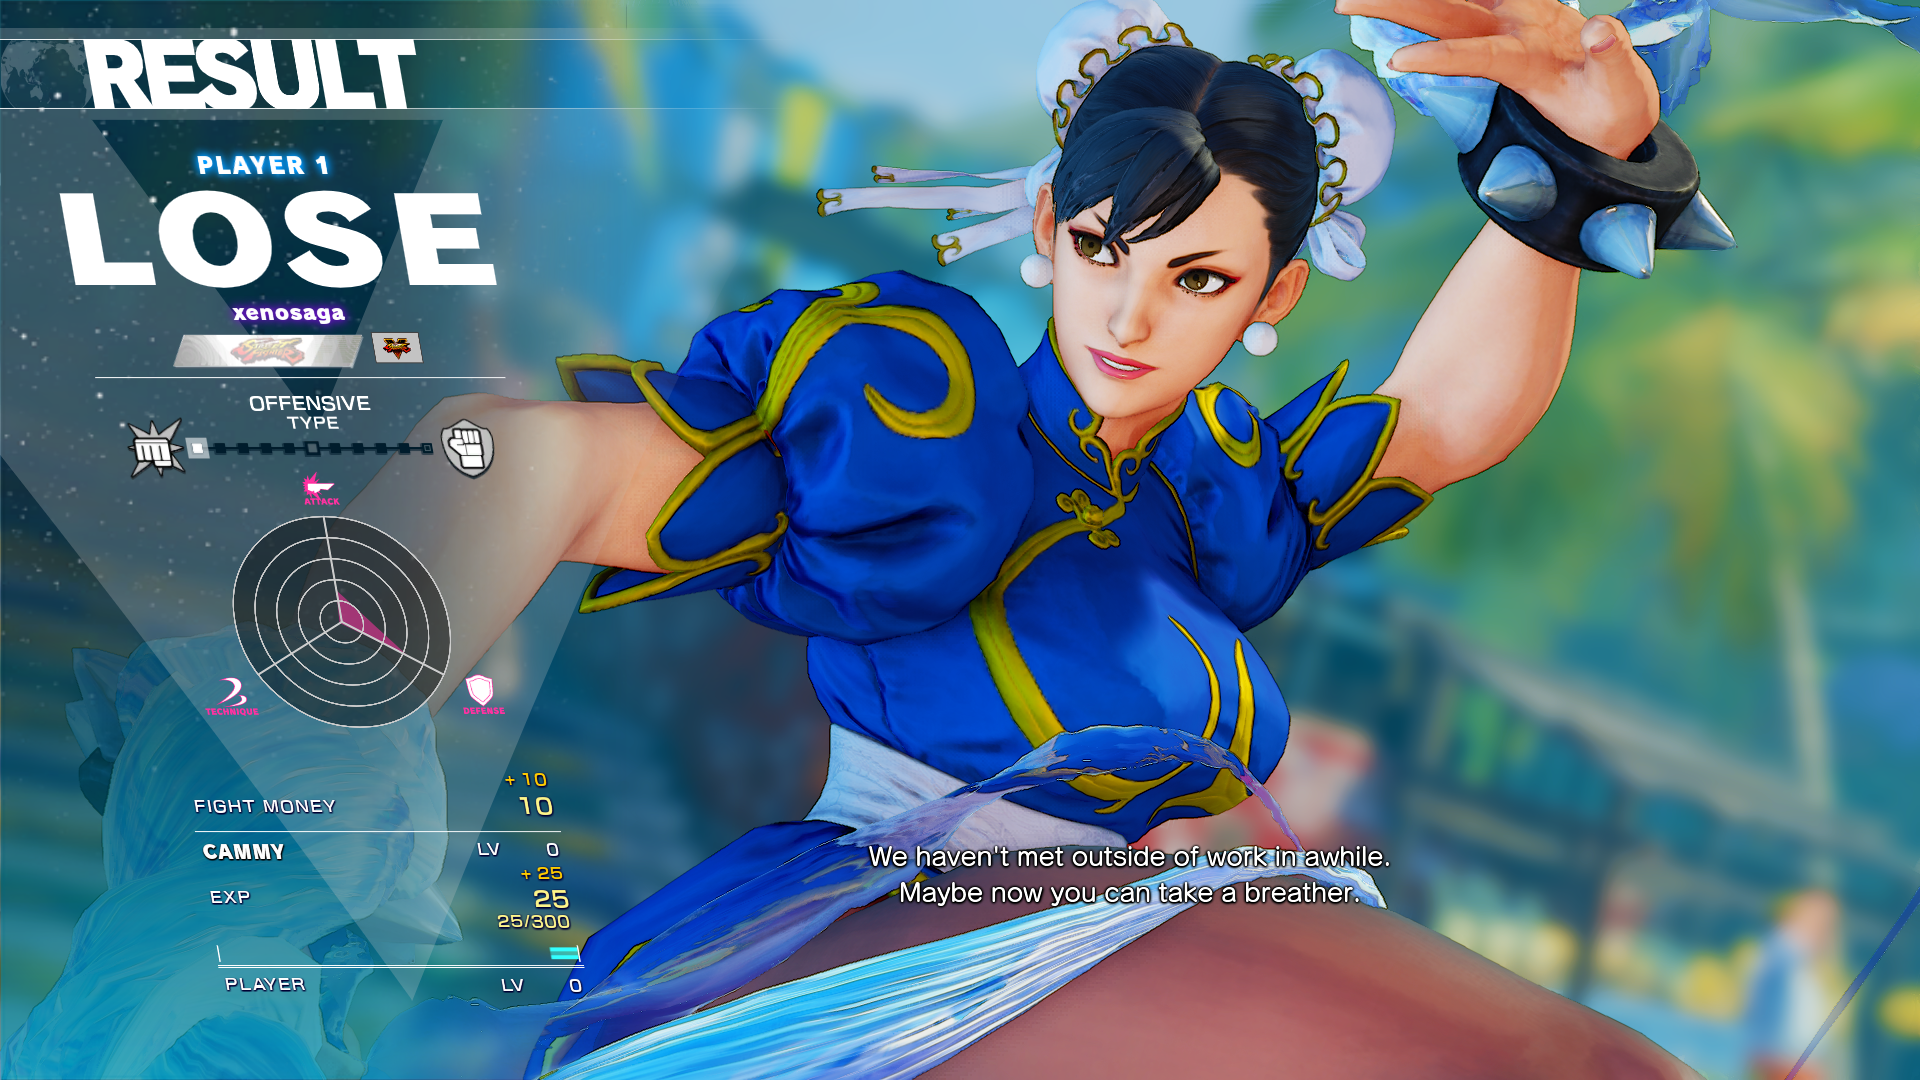 Mostly I need them to fix win Chun's face in her win pose. 